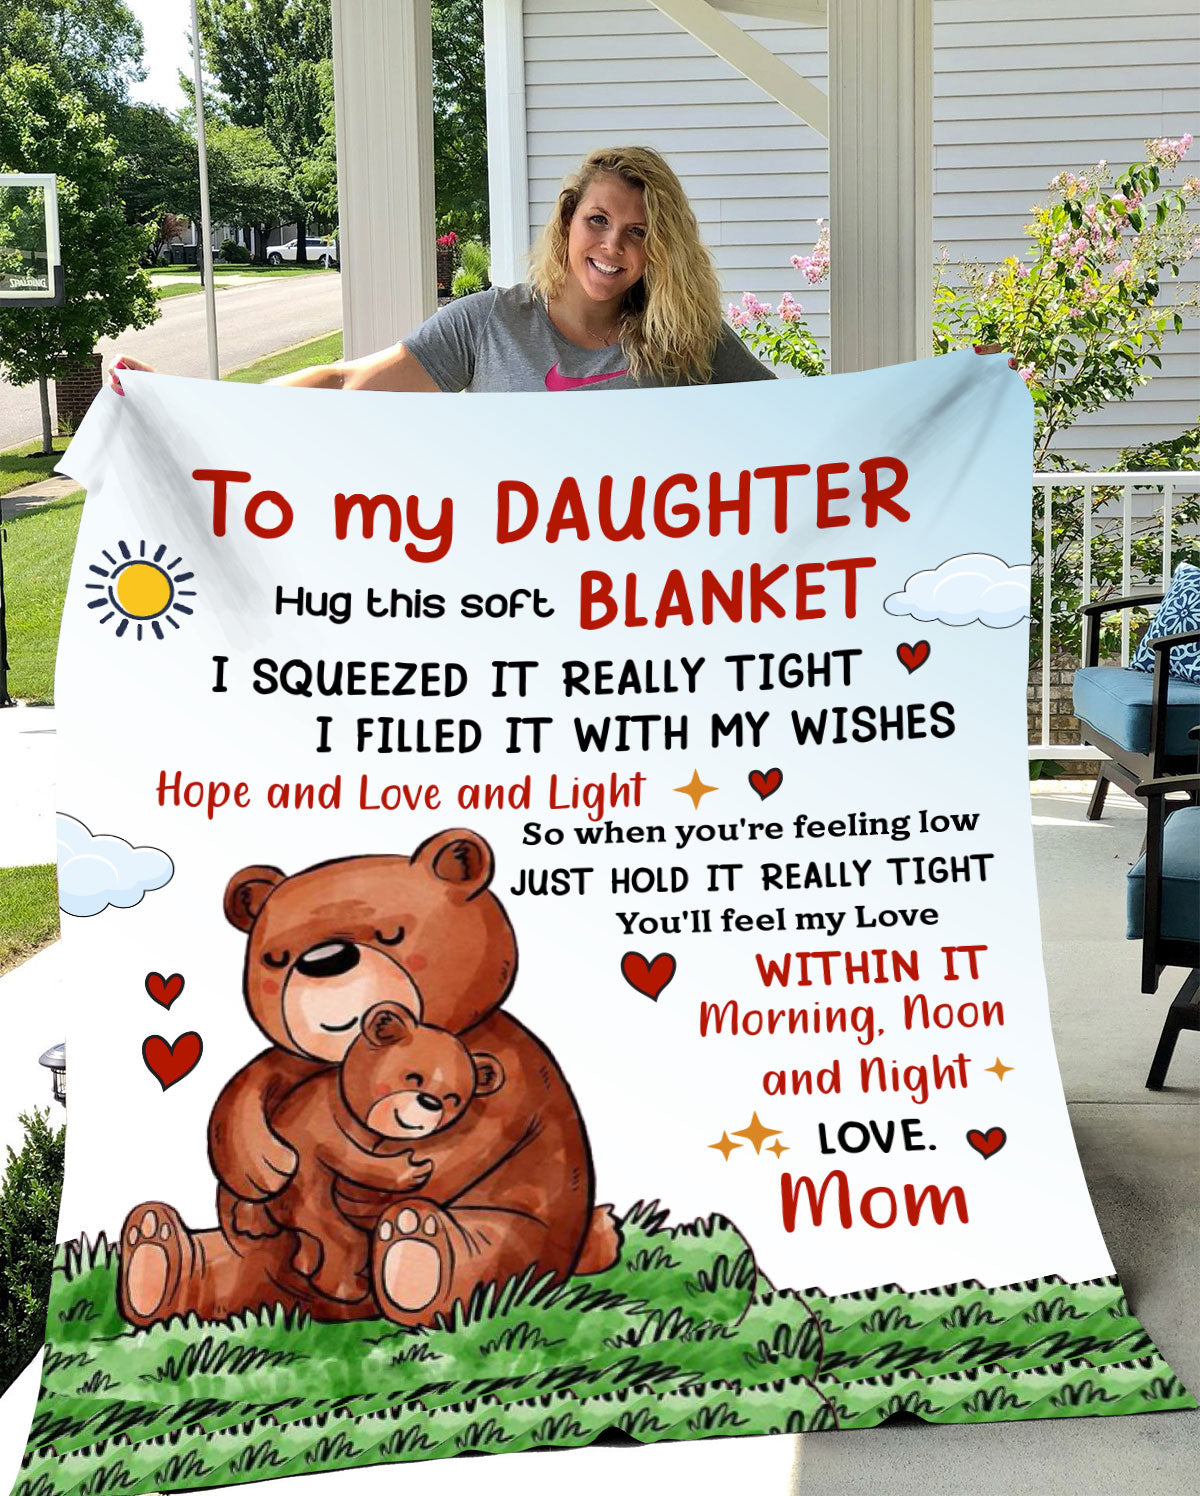 To My Daughter | I Squeezed It Really Tight | Arctic Fleece Blanket 50x60